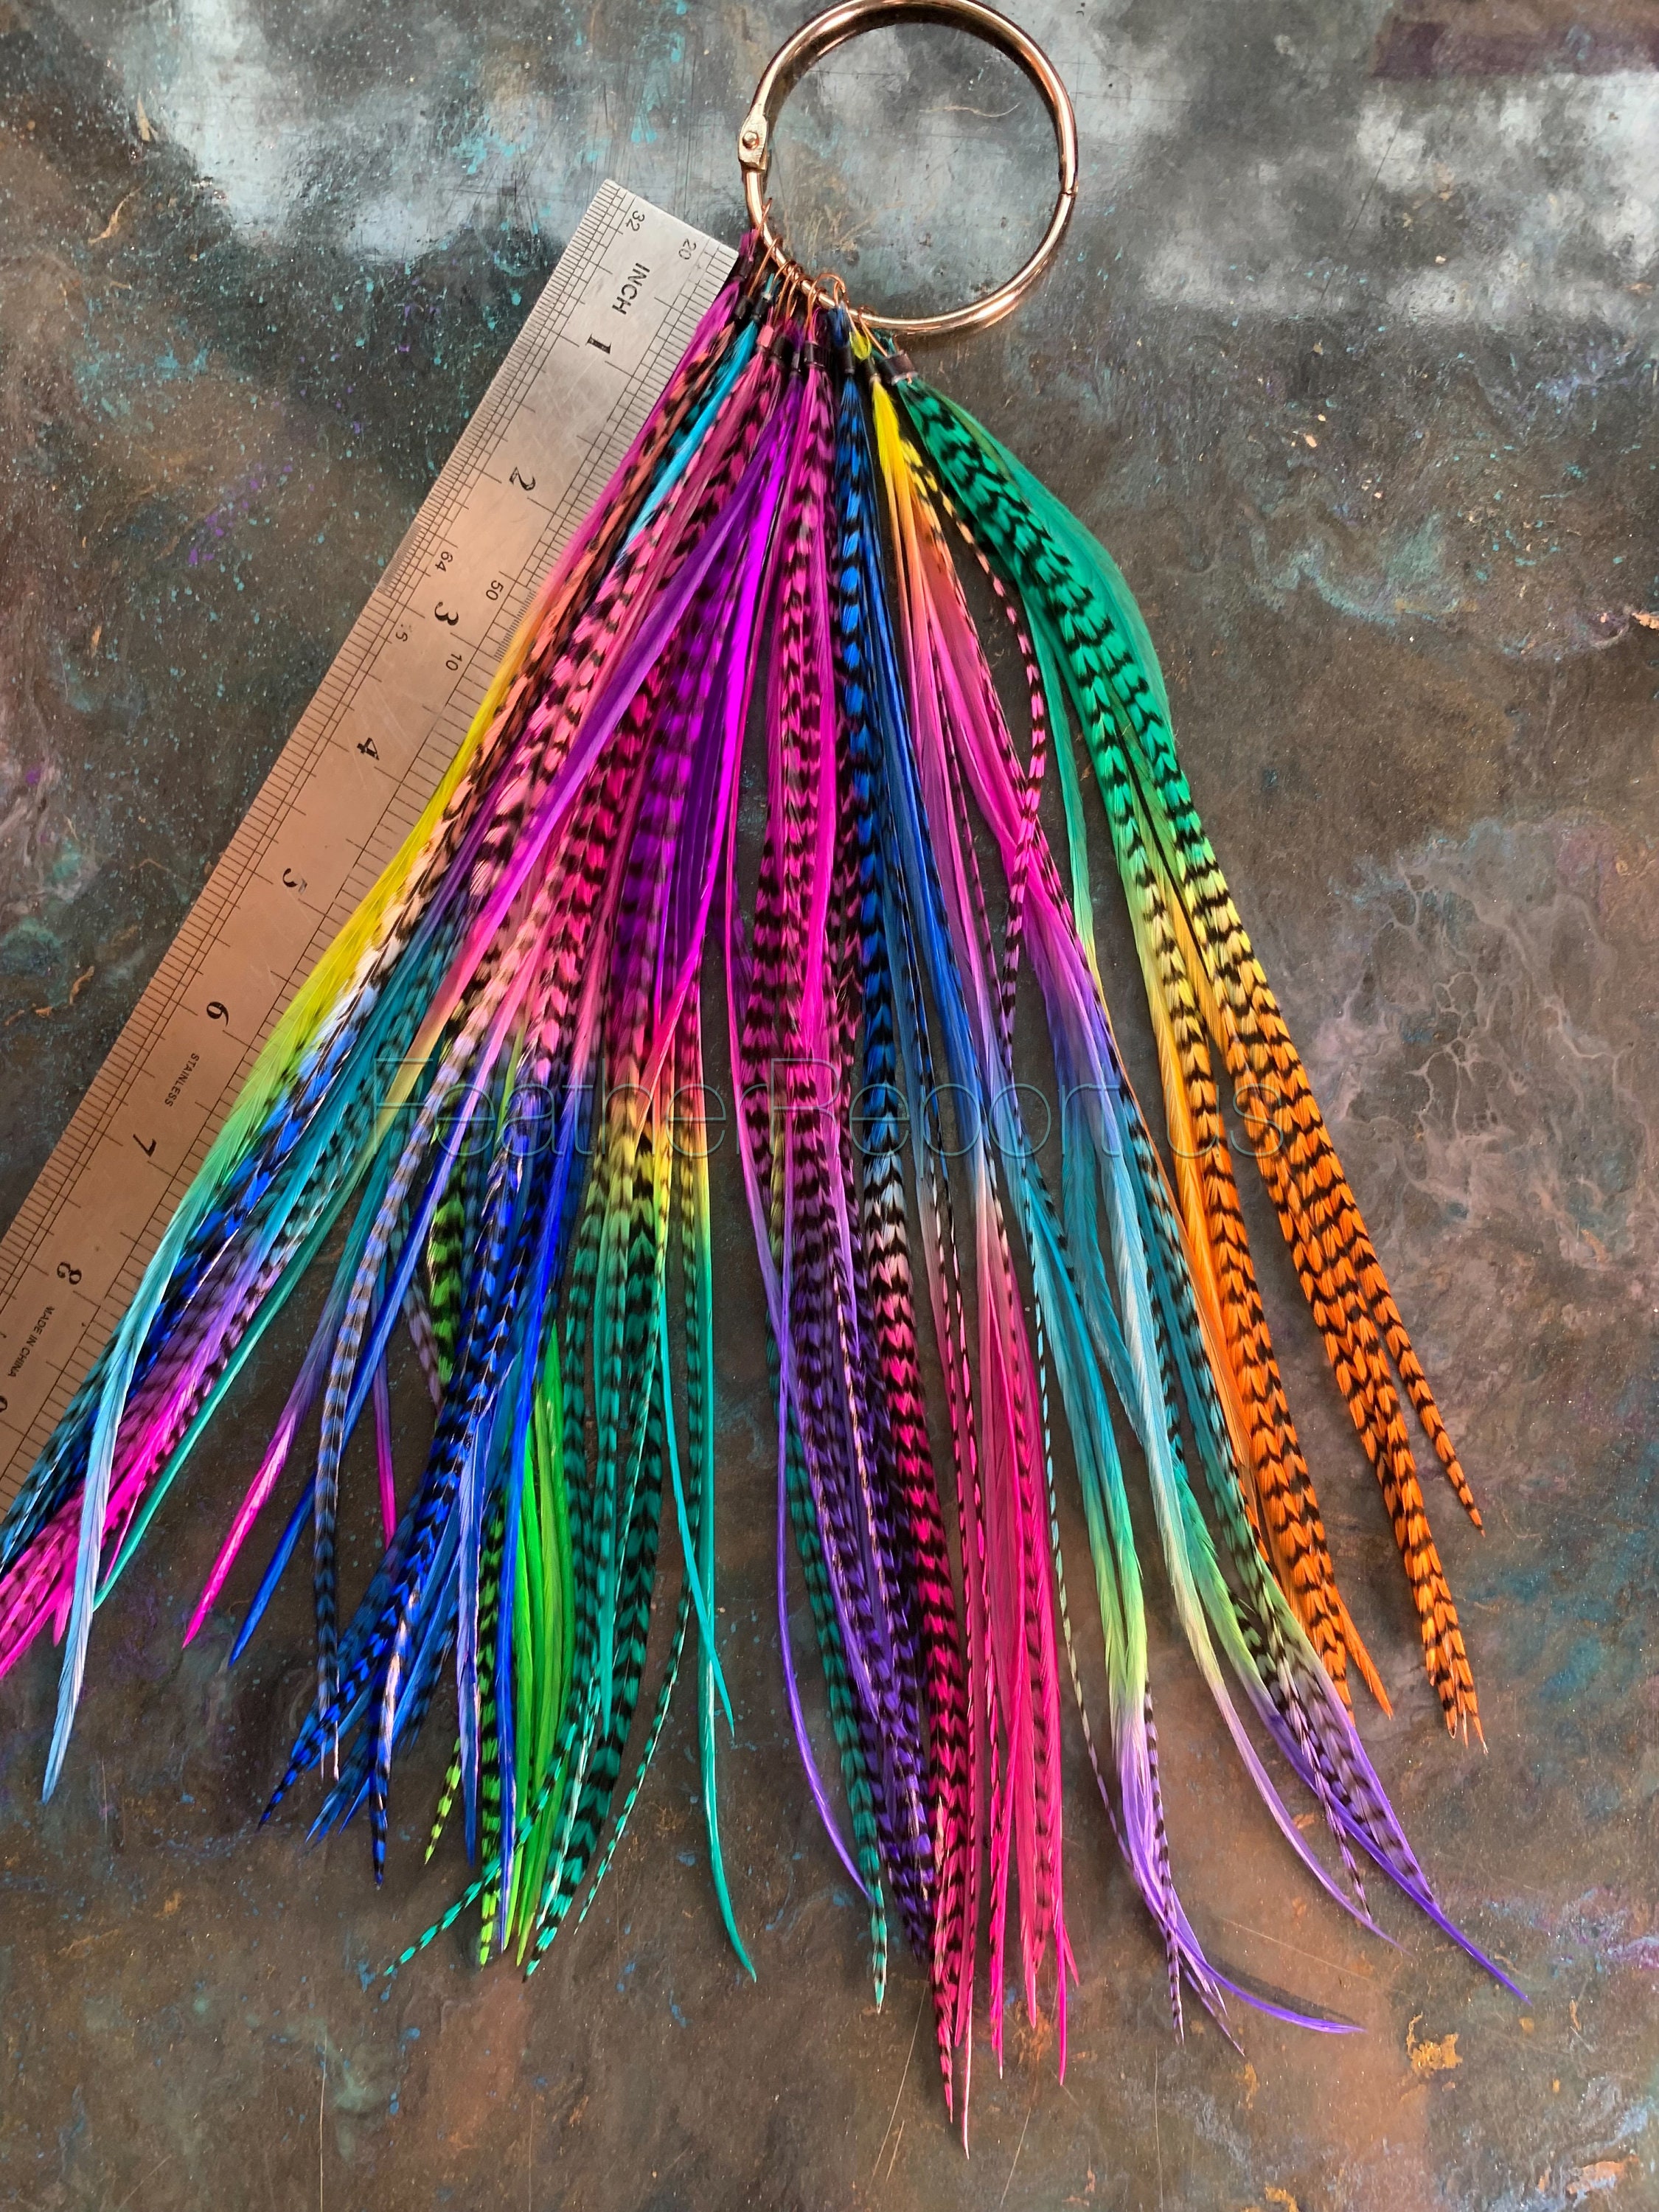 Natural Craft Feathers Bulk Earring Feathers for Earrings Fly Tying  Feathers Patterned Thin Craft Feathers Feather Extensions 25 per Pack 